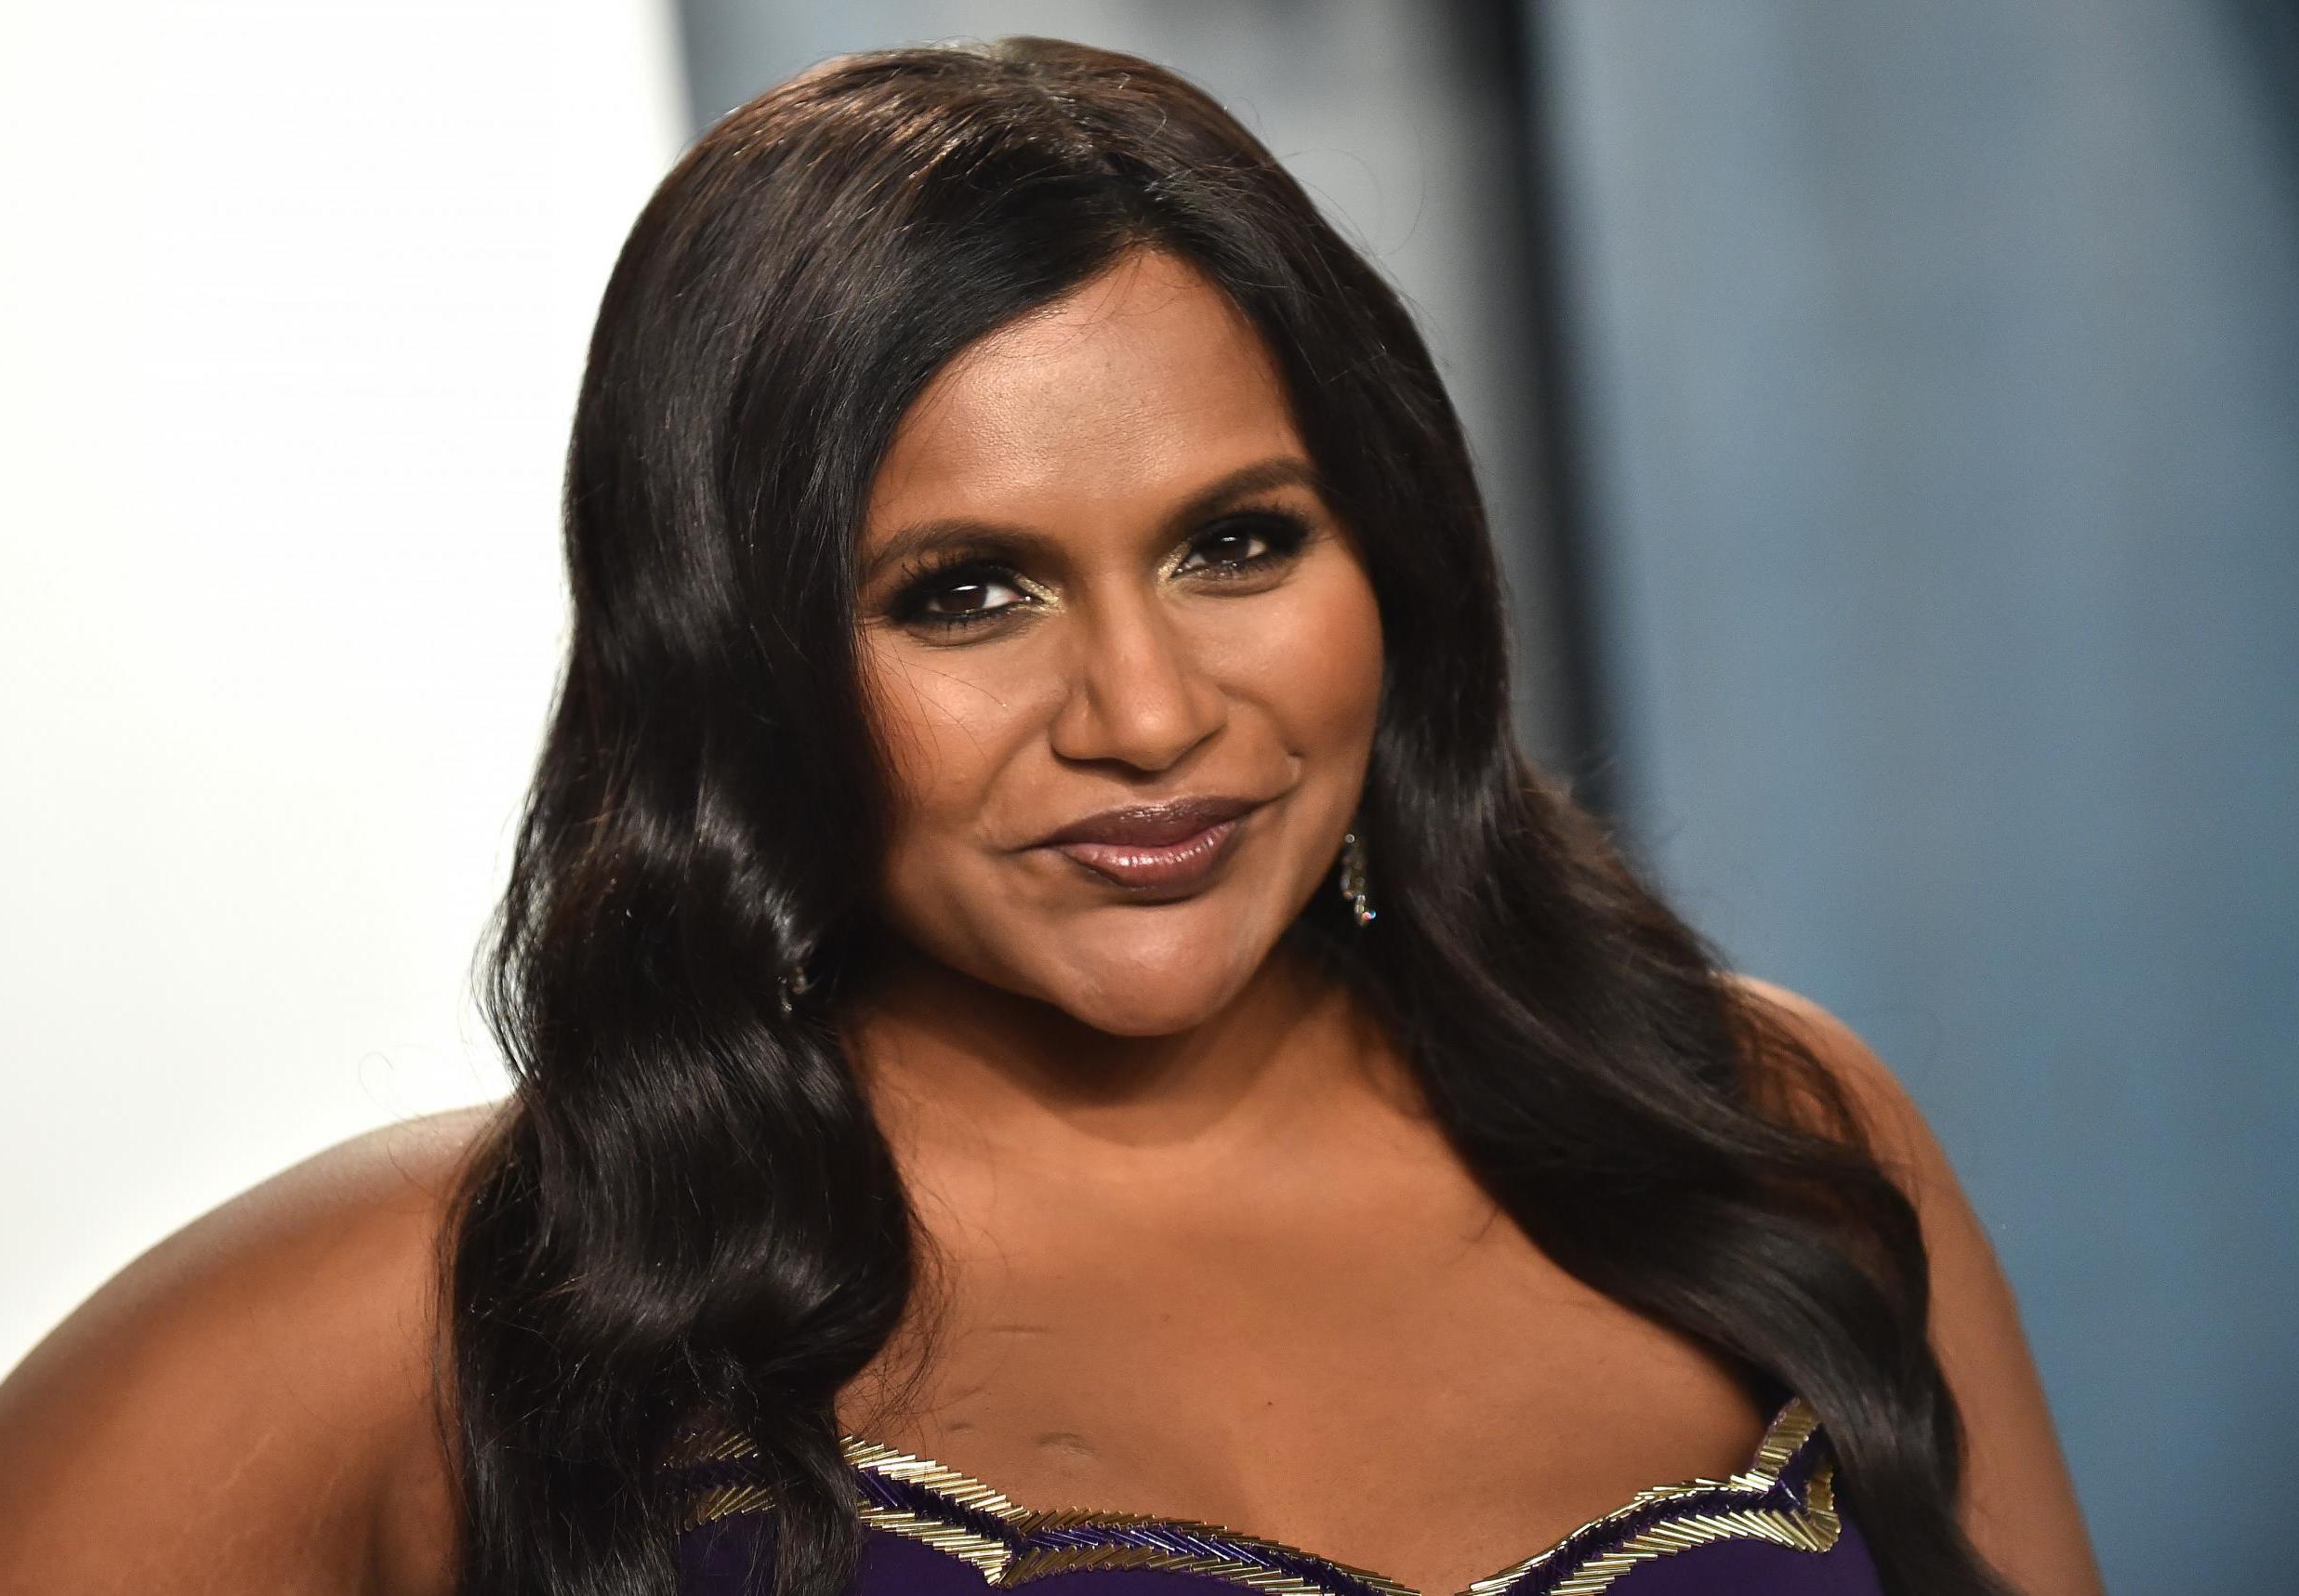 Mindy Kaling is telling a story that resonates with her in Netflix’s ‘Never Have I Ever’